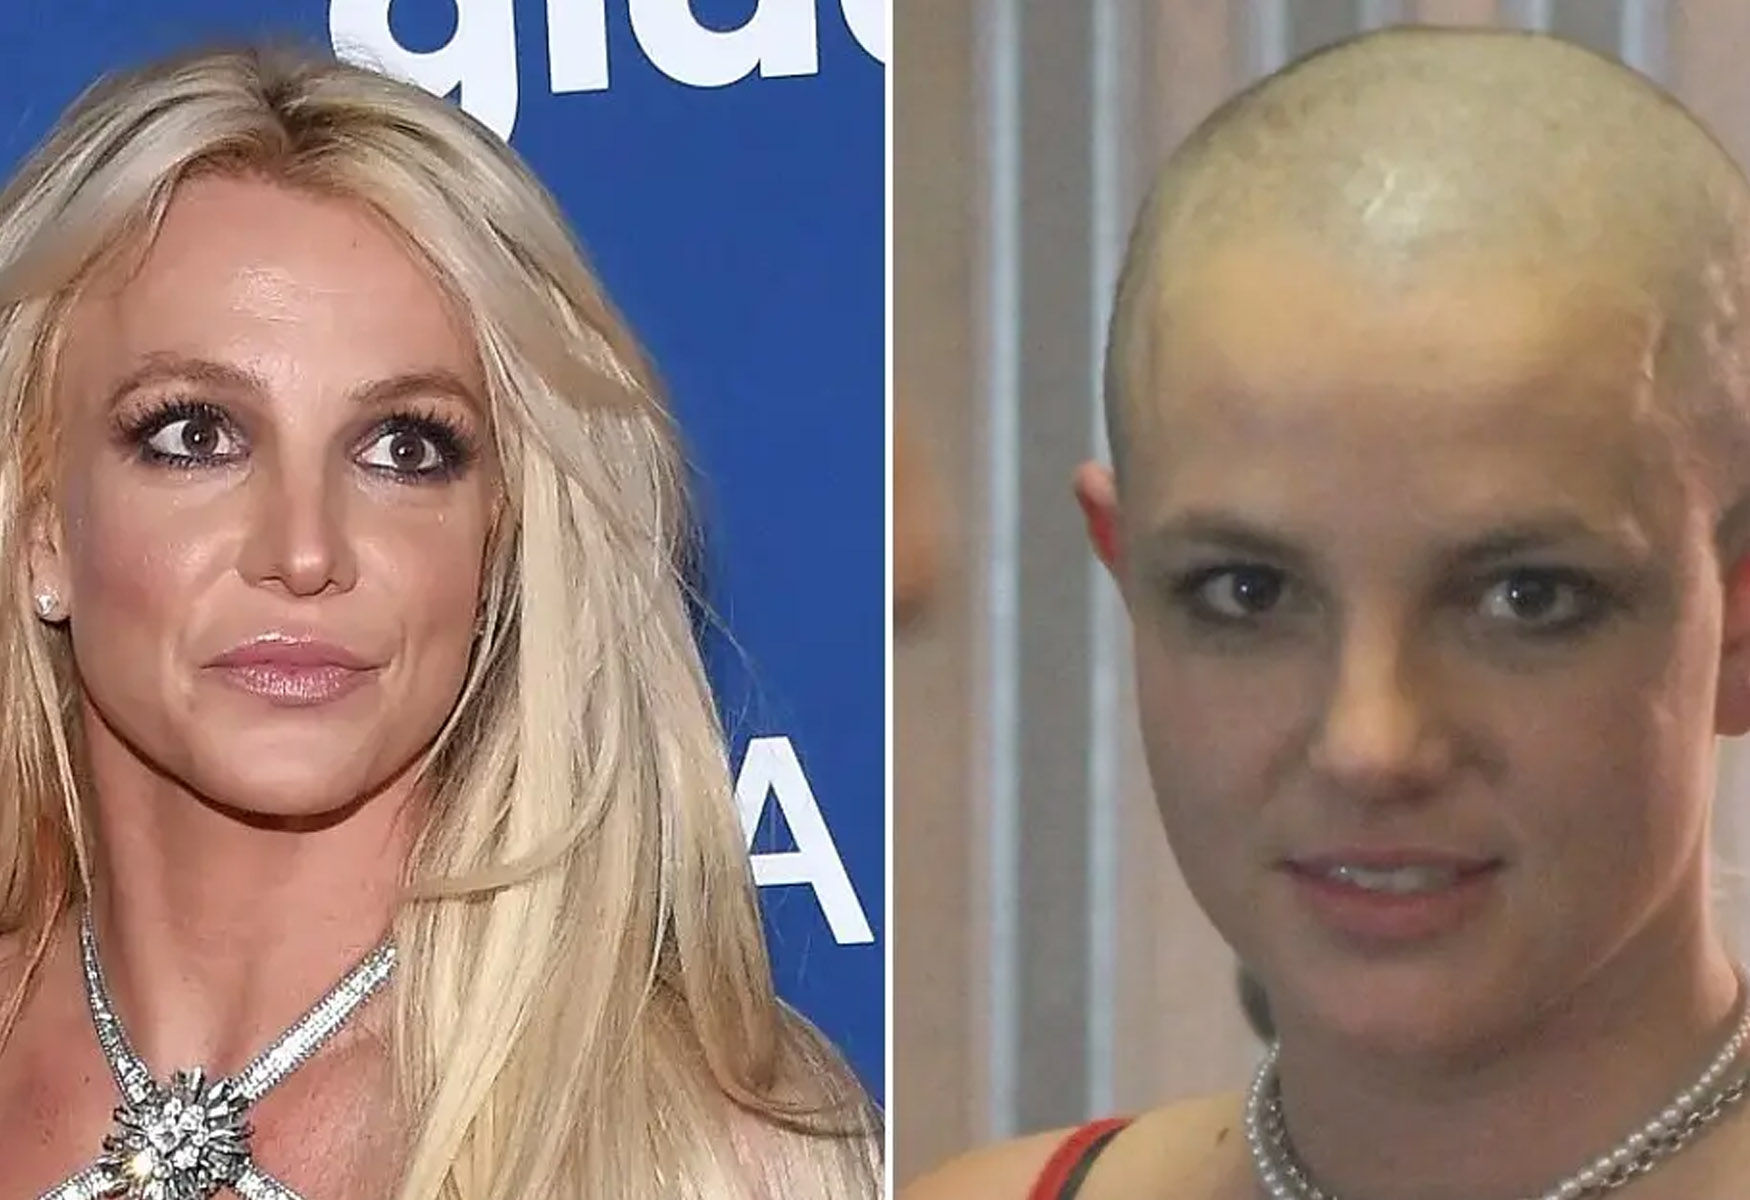 New Revelation: Britney Spears Shaved Head As An Act Of Rebellion Before Conservatorship